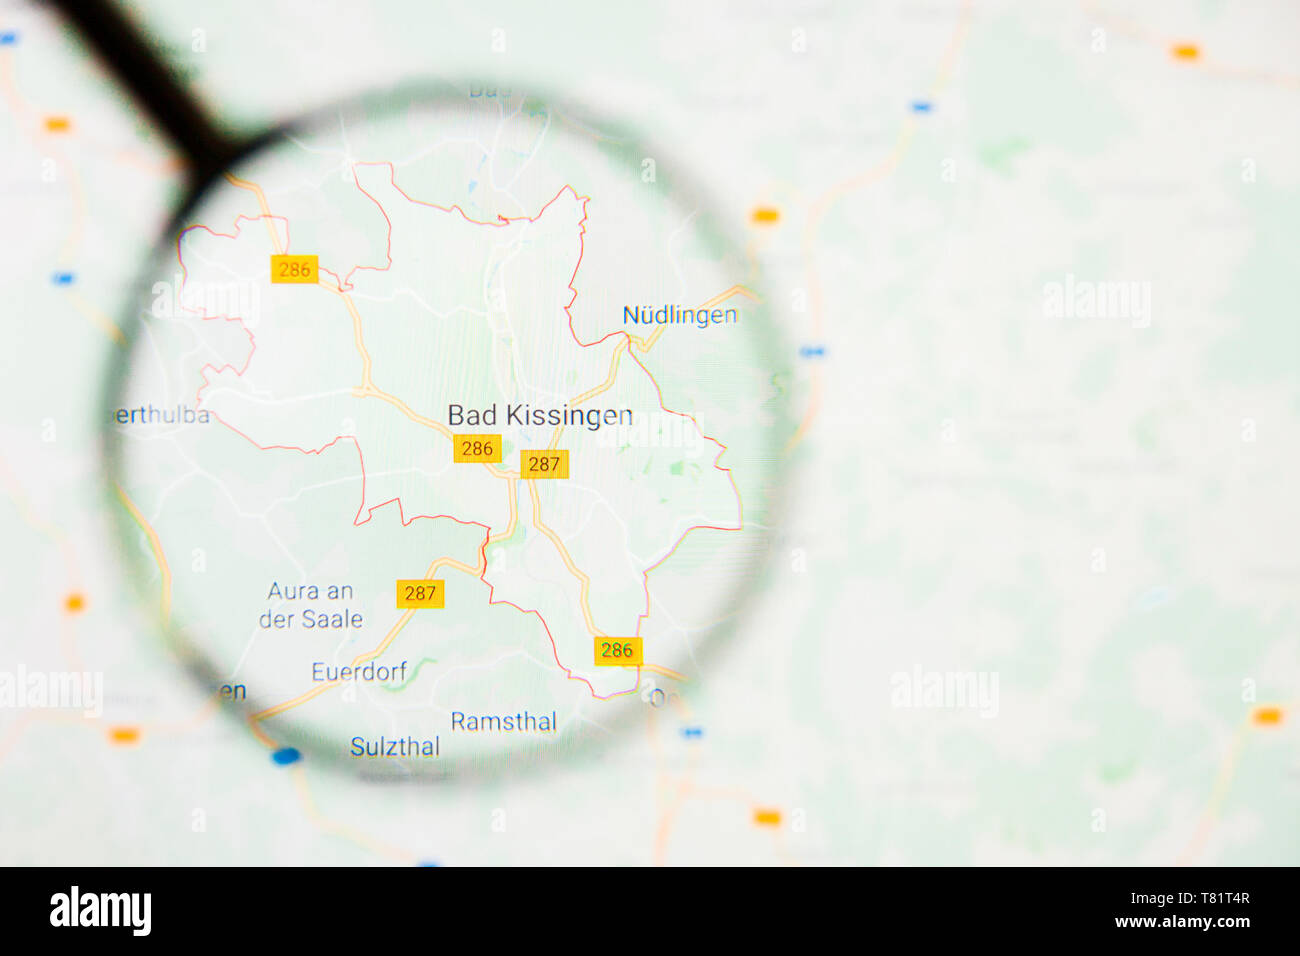 Bad Kissingen city in Germany, Bavaria visualization illustrative concept on screen through magnifying glass Stock Photo